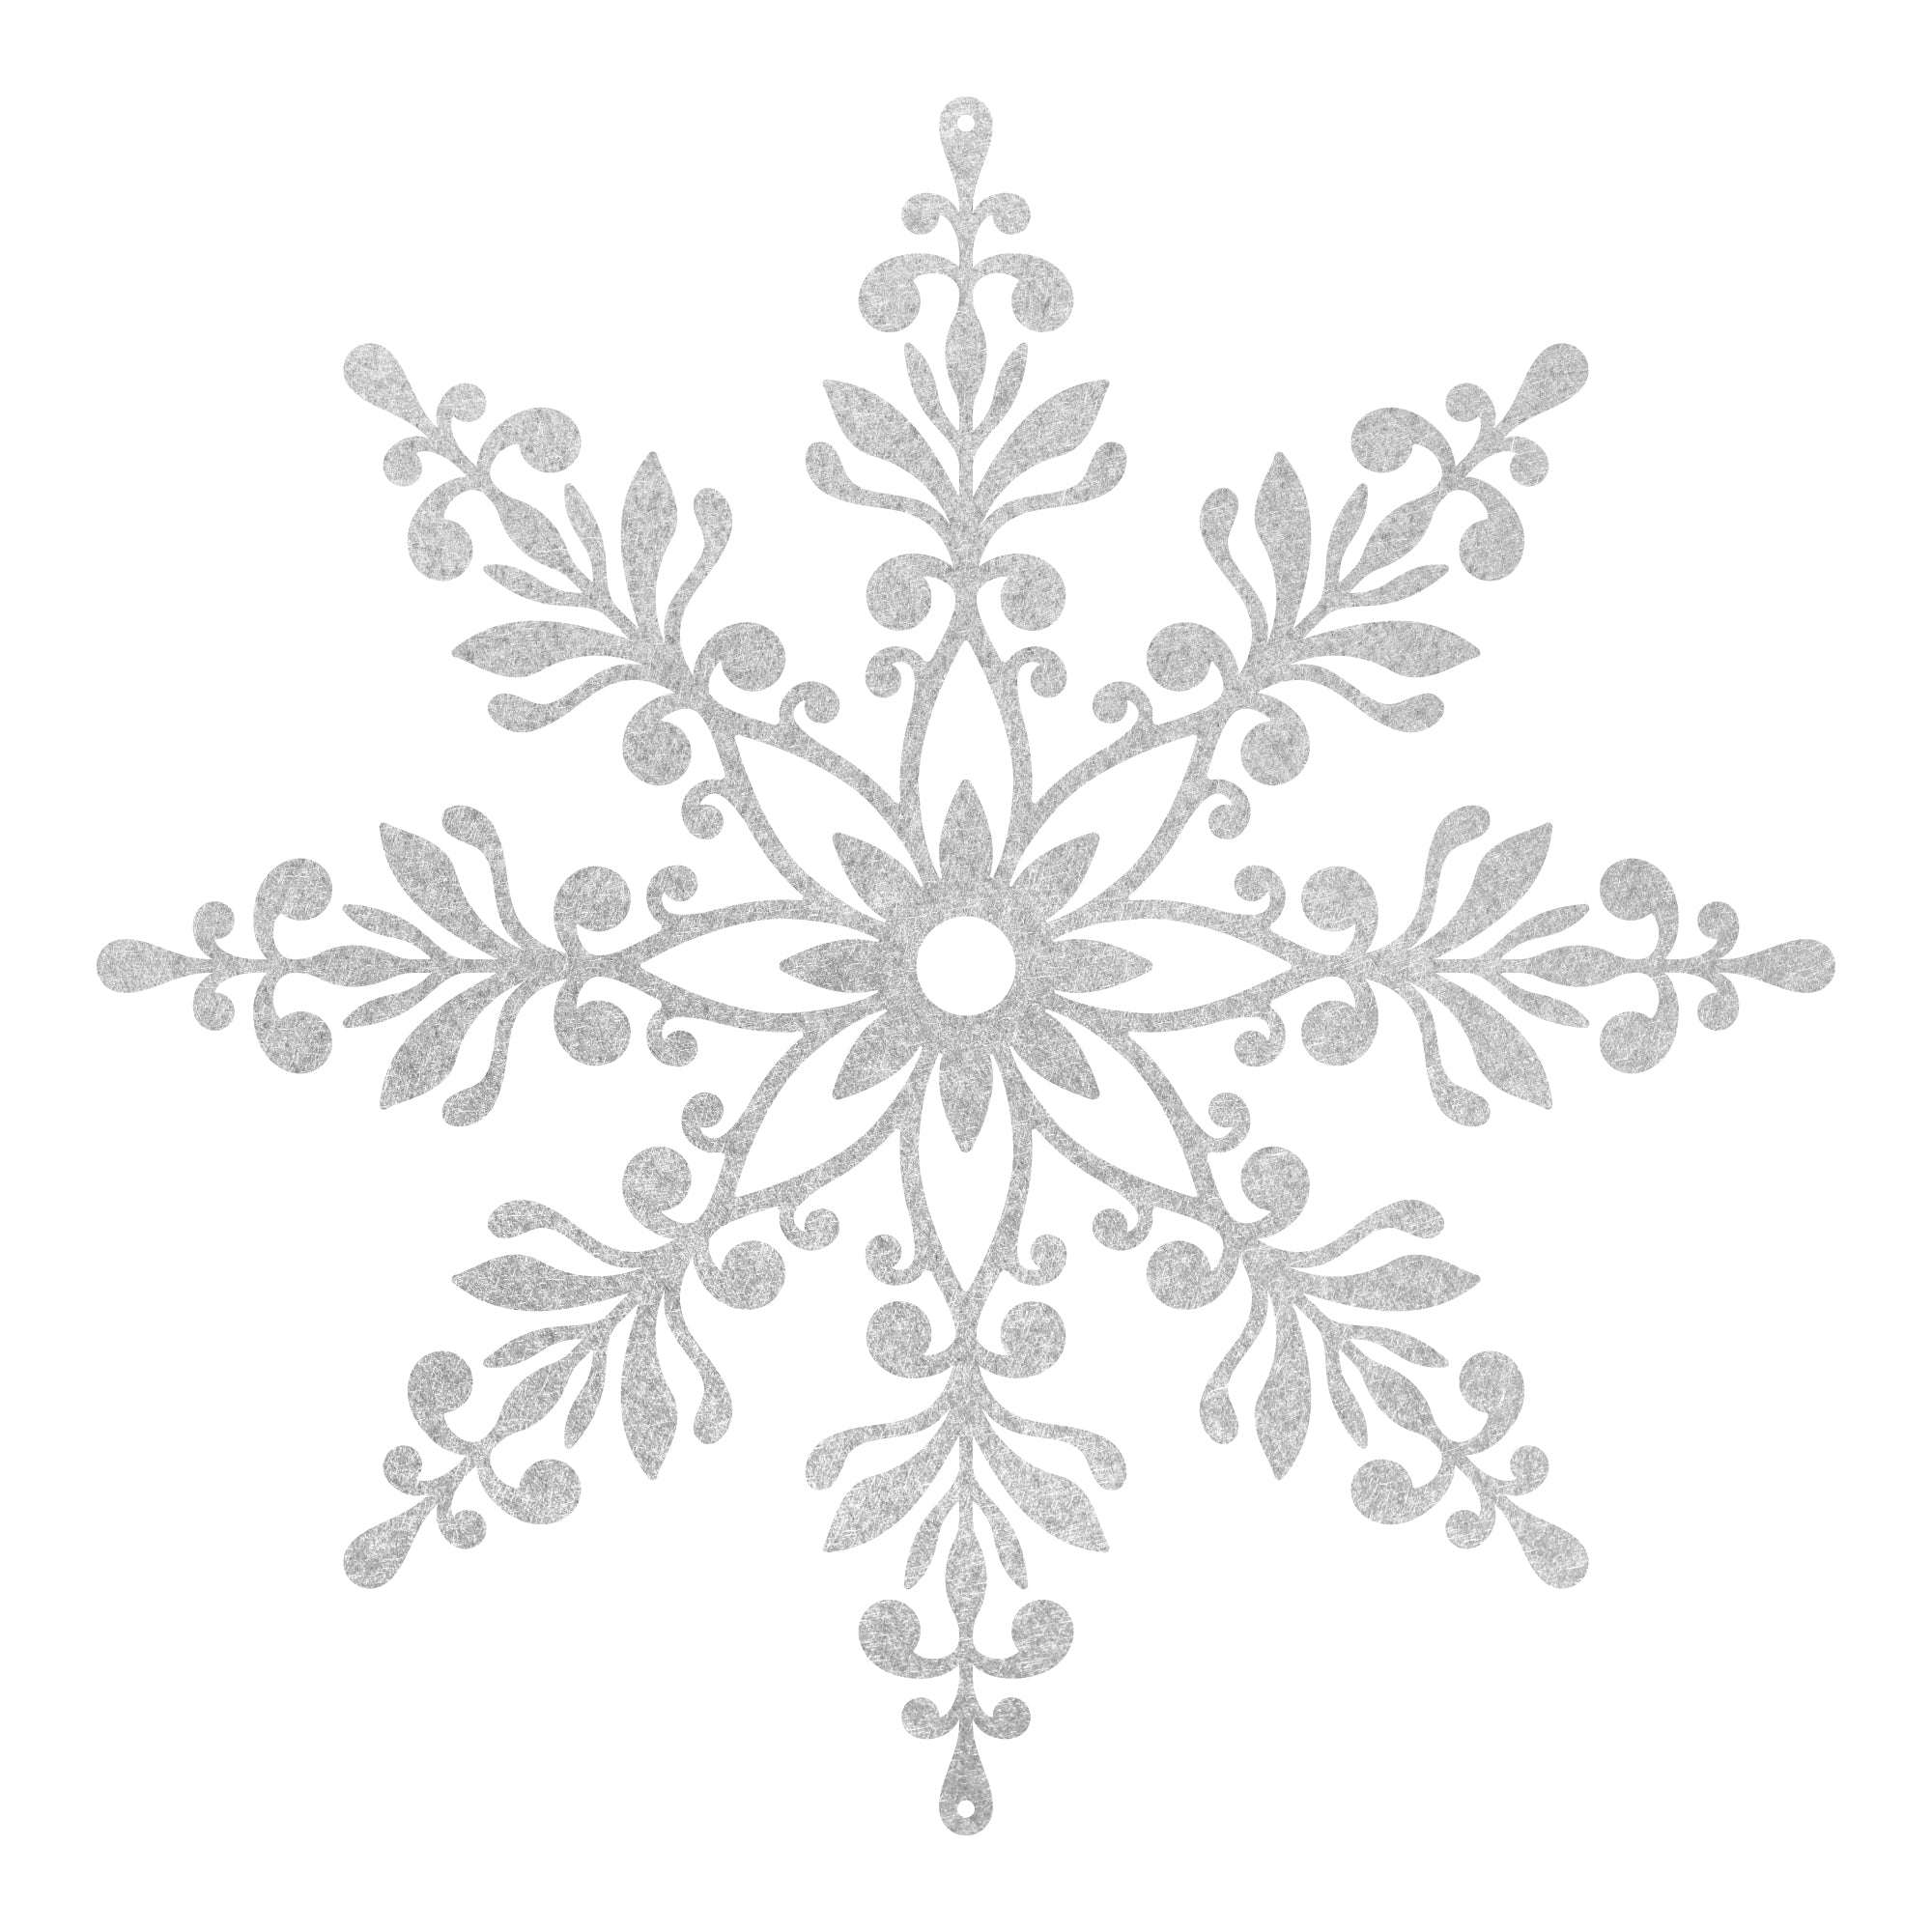 Snowflake – Small – Art Glass Love by Wardell